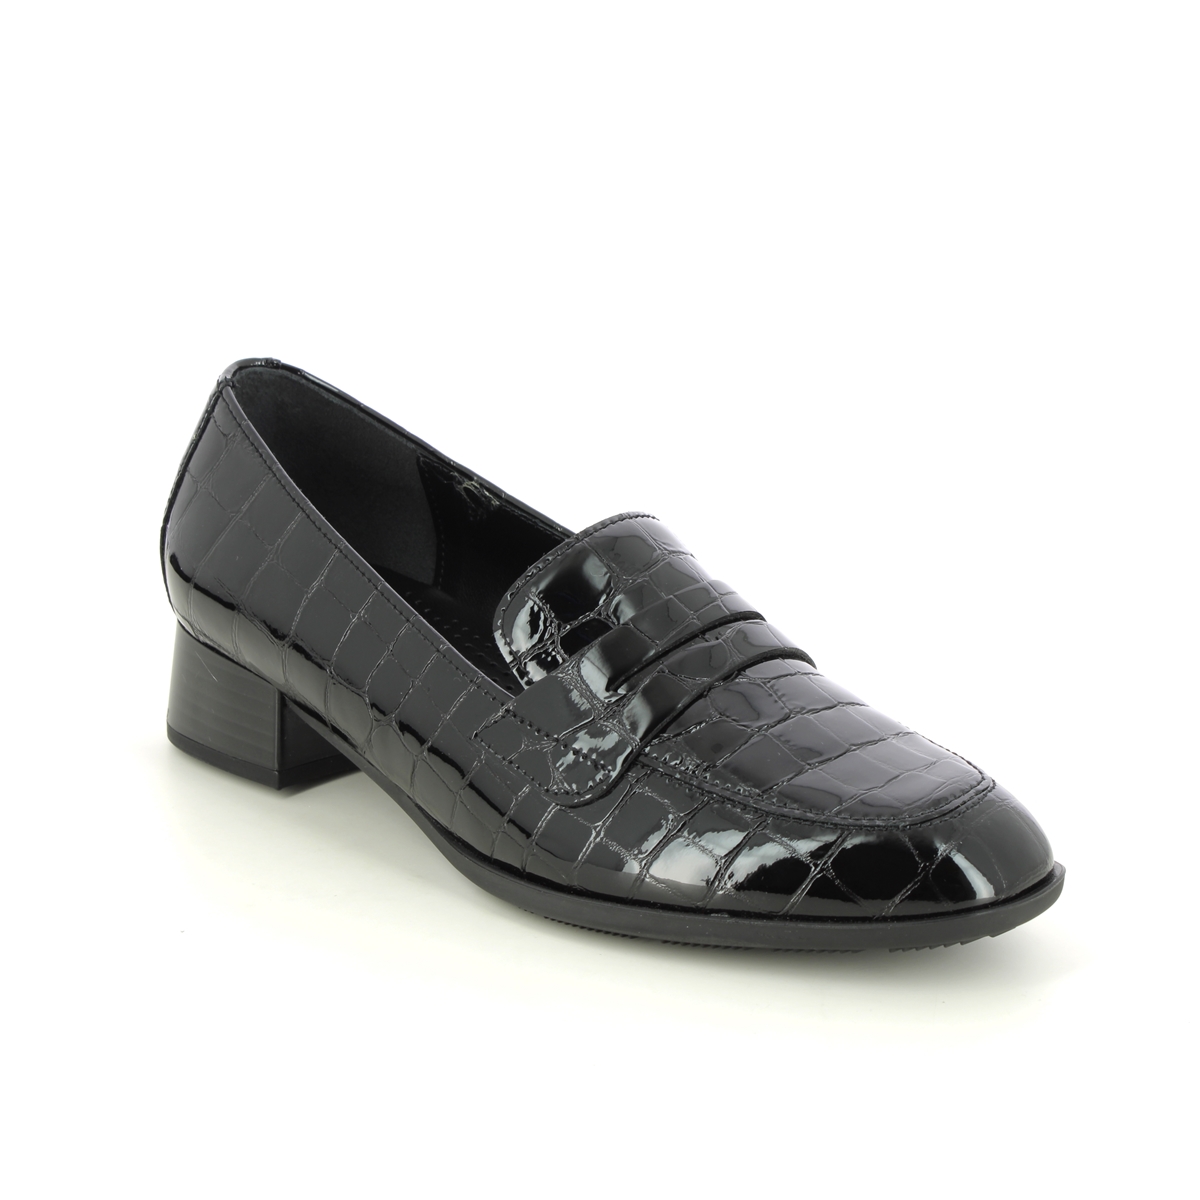 Gabor Right Penny Black Croc Womens Loafers 35.280.97 In Size 4.5 In Plain Black Croc Effect  Womens Loafers In Soft Black Croc Effect Leather